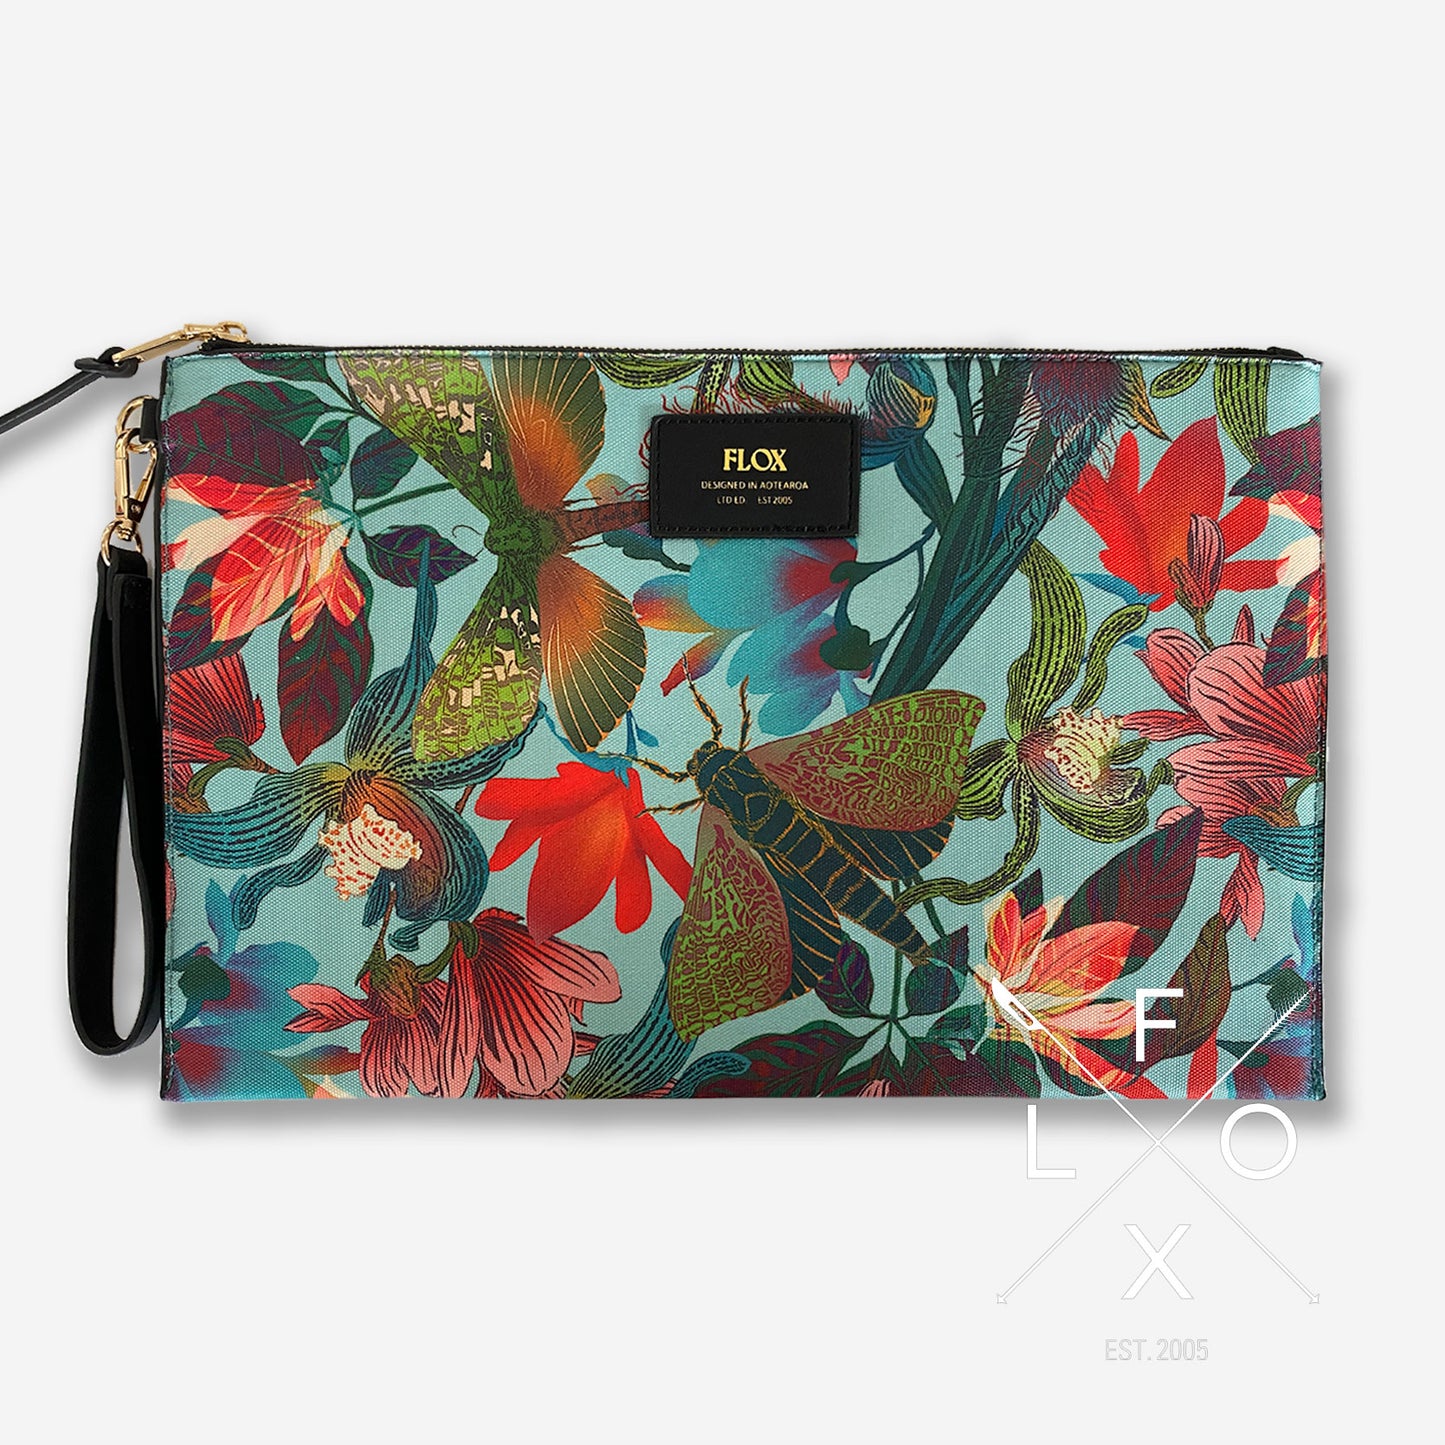 Flox clutch bag with NZ native flying insects and flowers in shades of blue, green, red and pink.